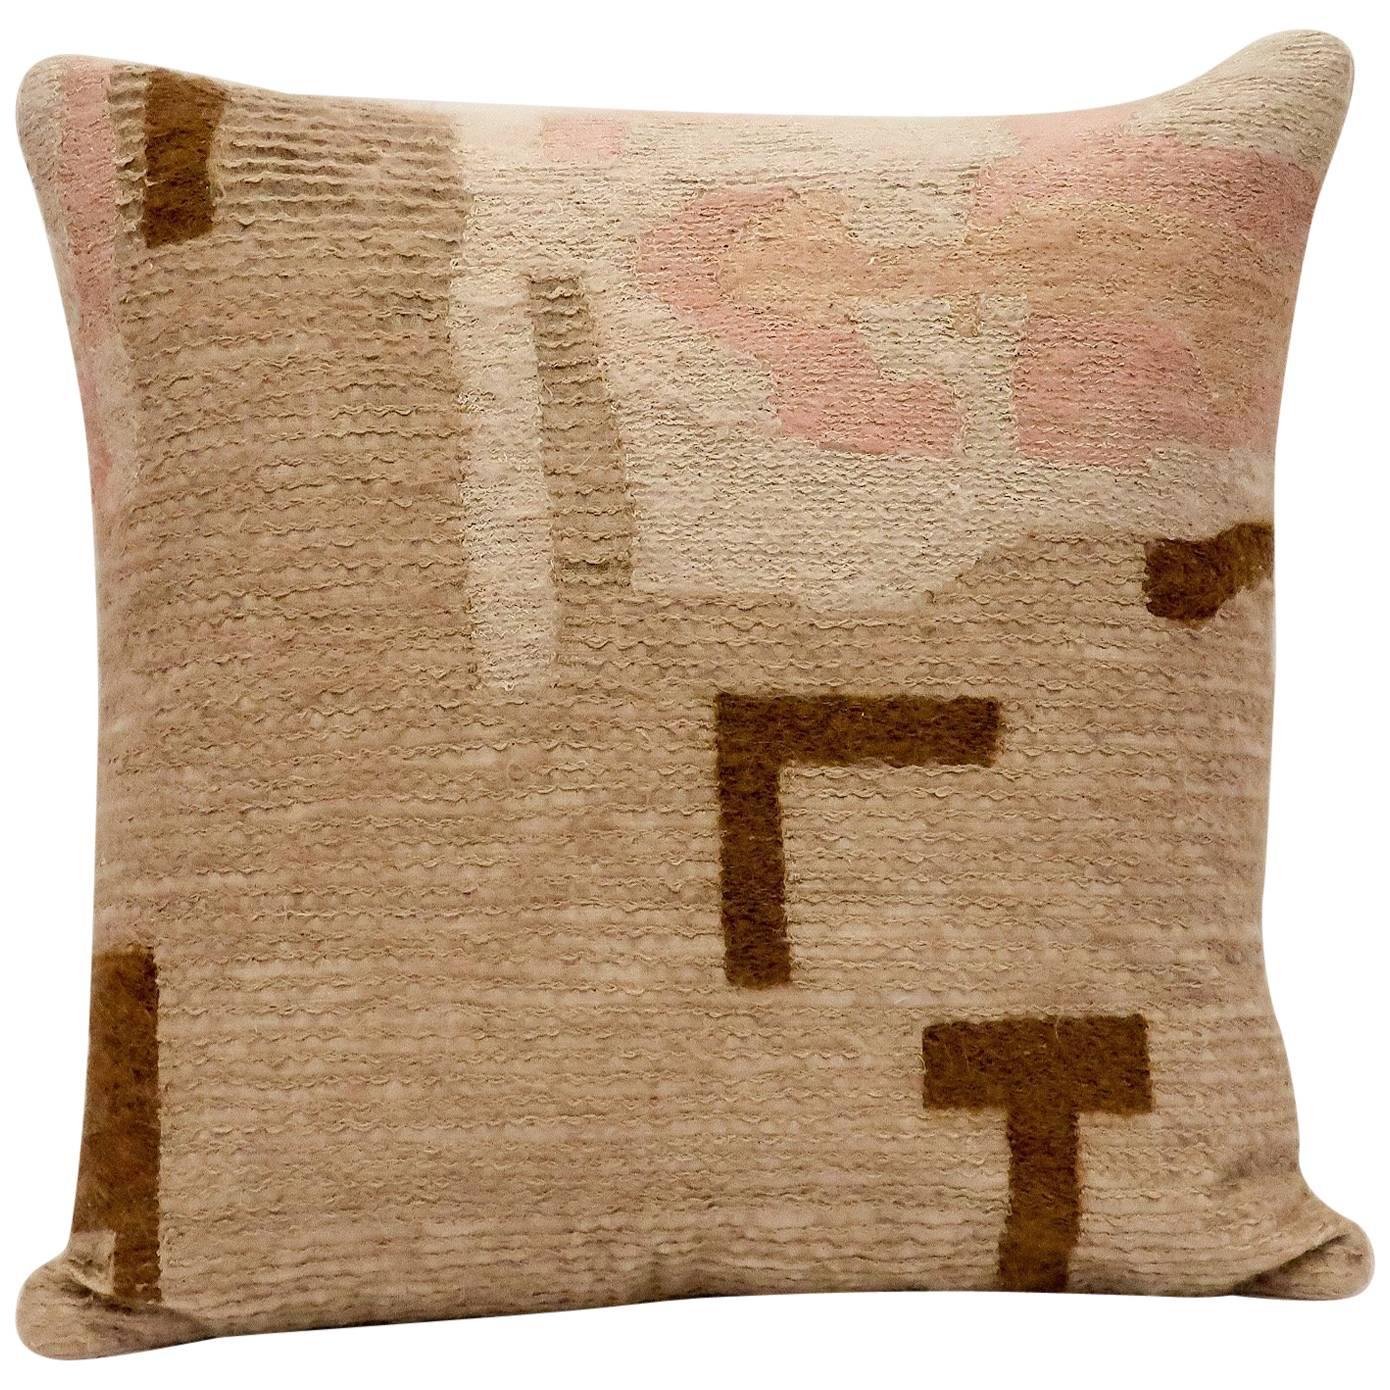 Handcrafted Embroidered Pillow Dusty Pink, Blush and Beige Wool Yarn For Sale